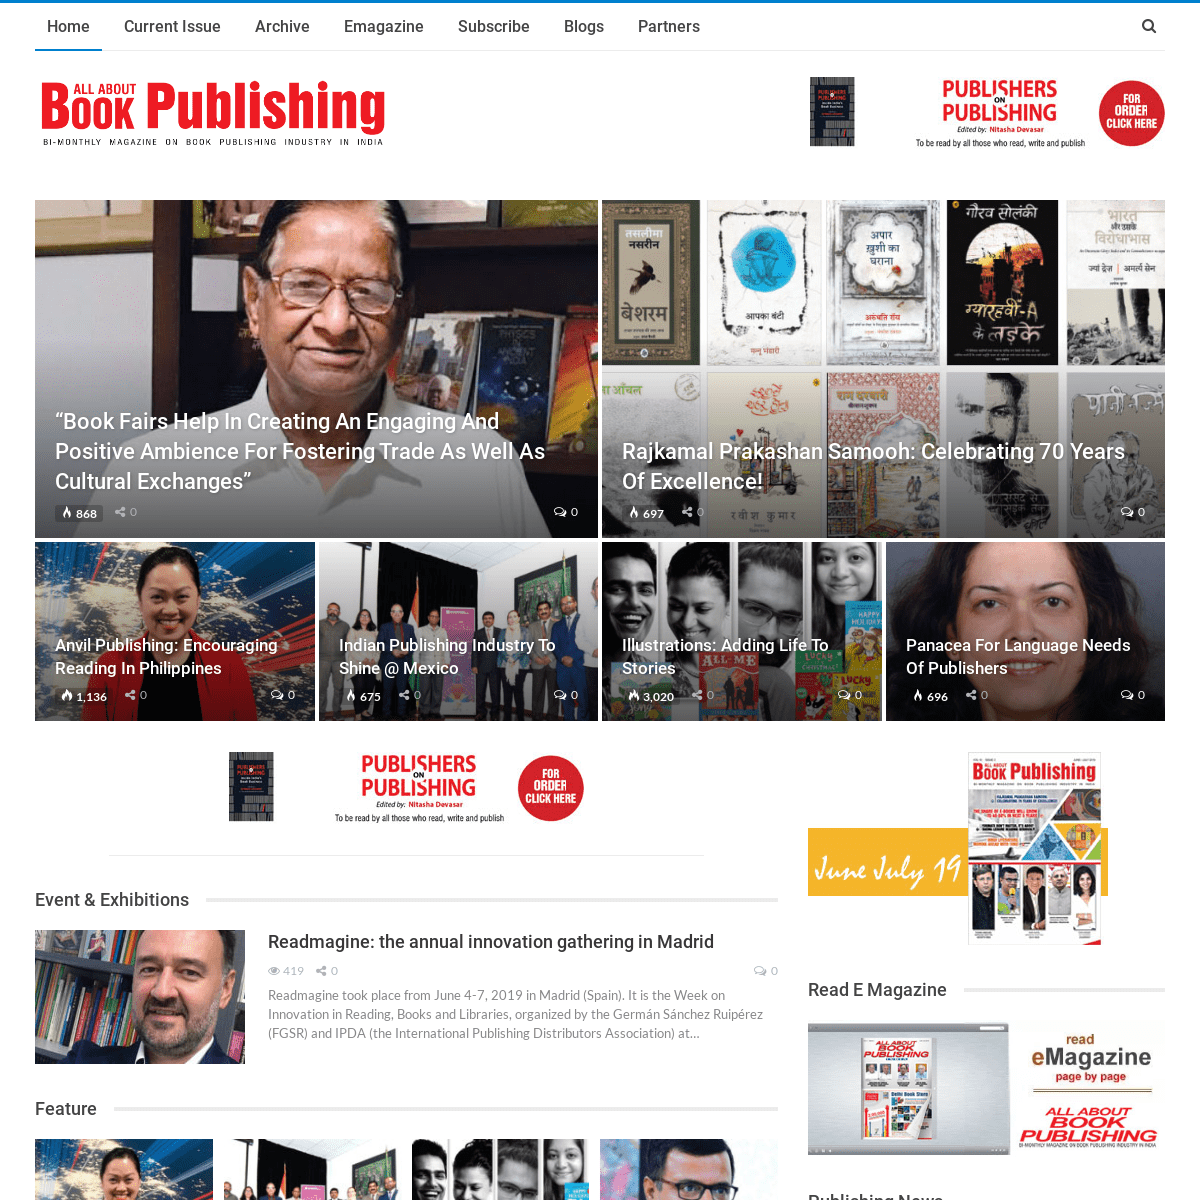 All About Book Publishing – Bi-monthly publication on book publishing industry